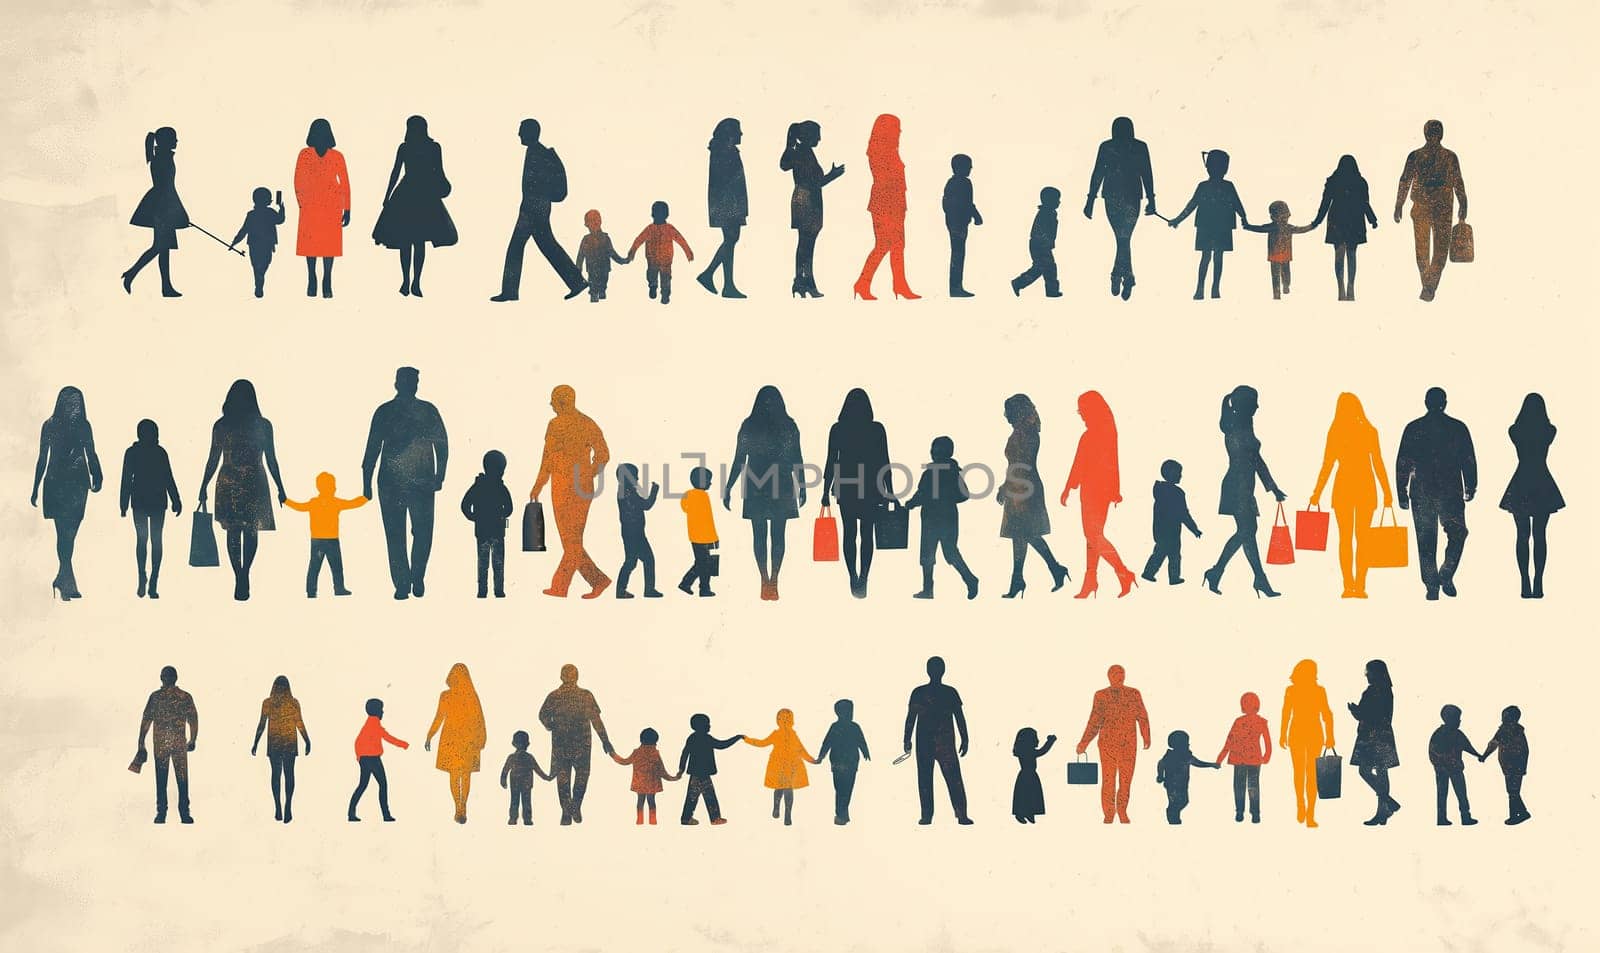 Pictogram of diverse people on a light background. by Fischeron